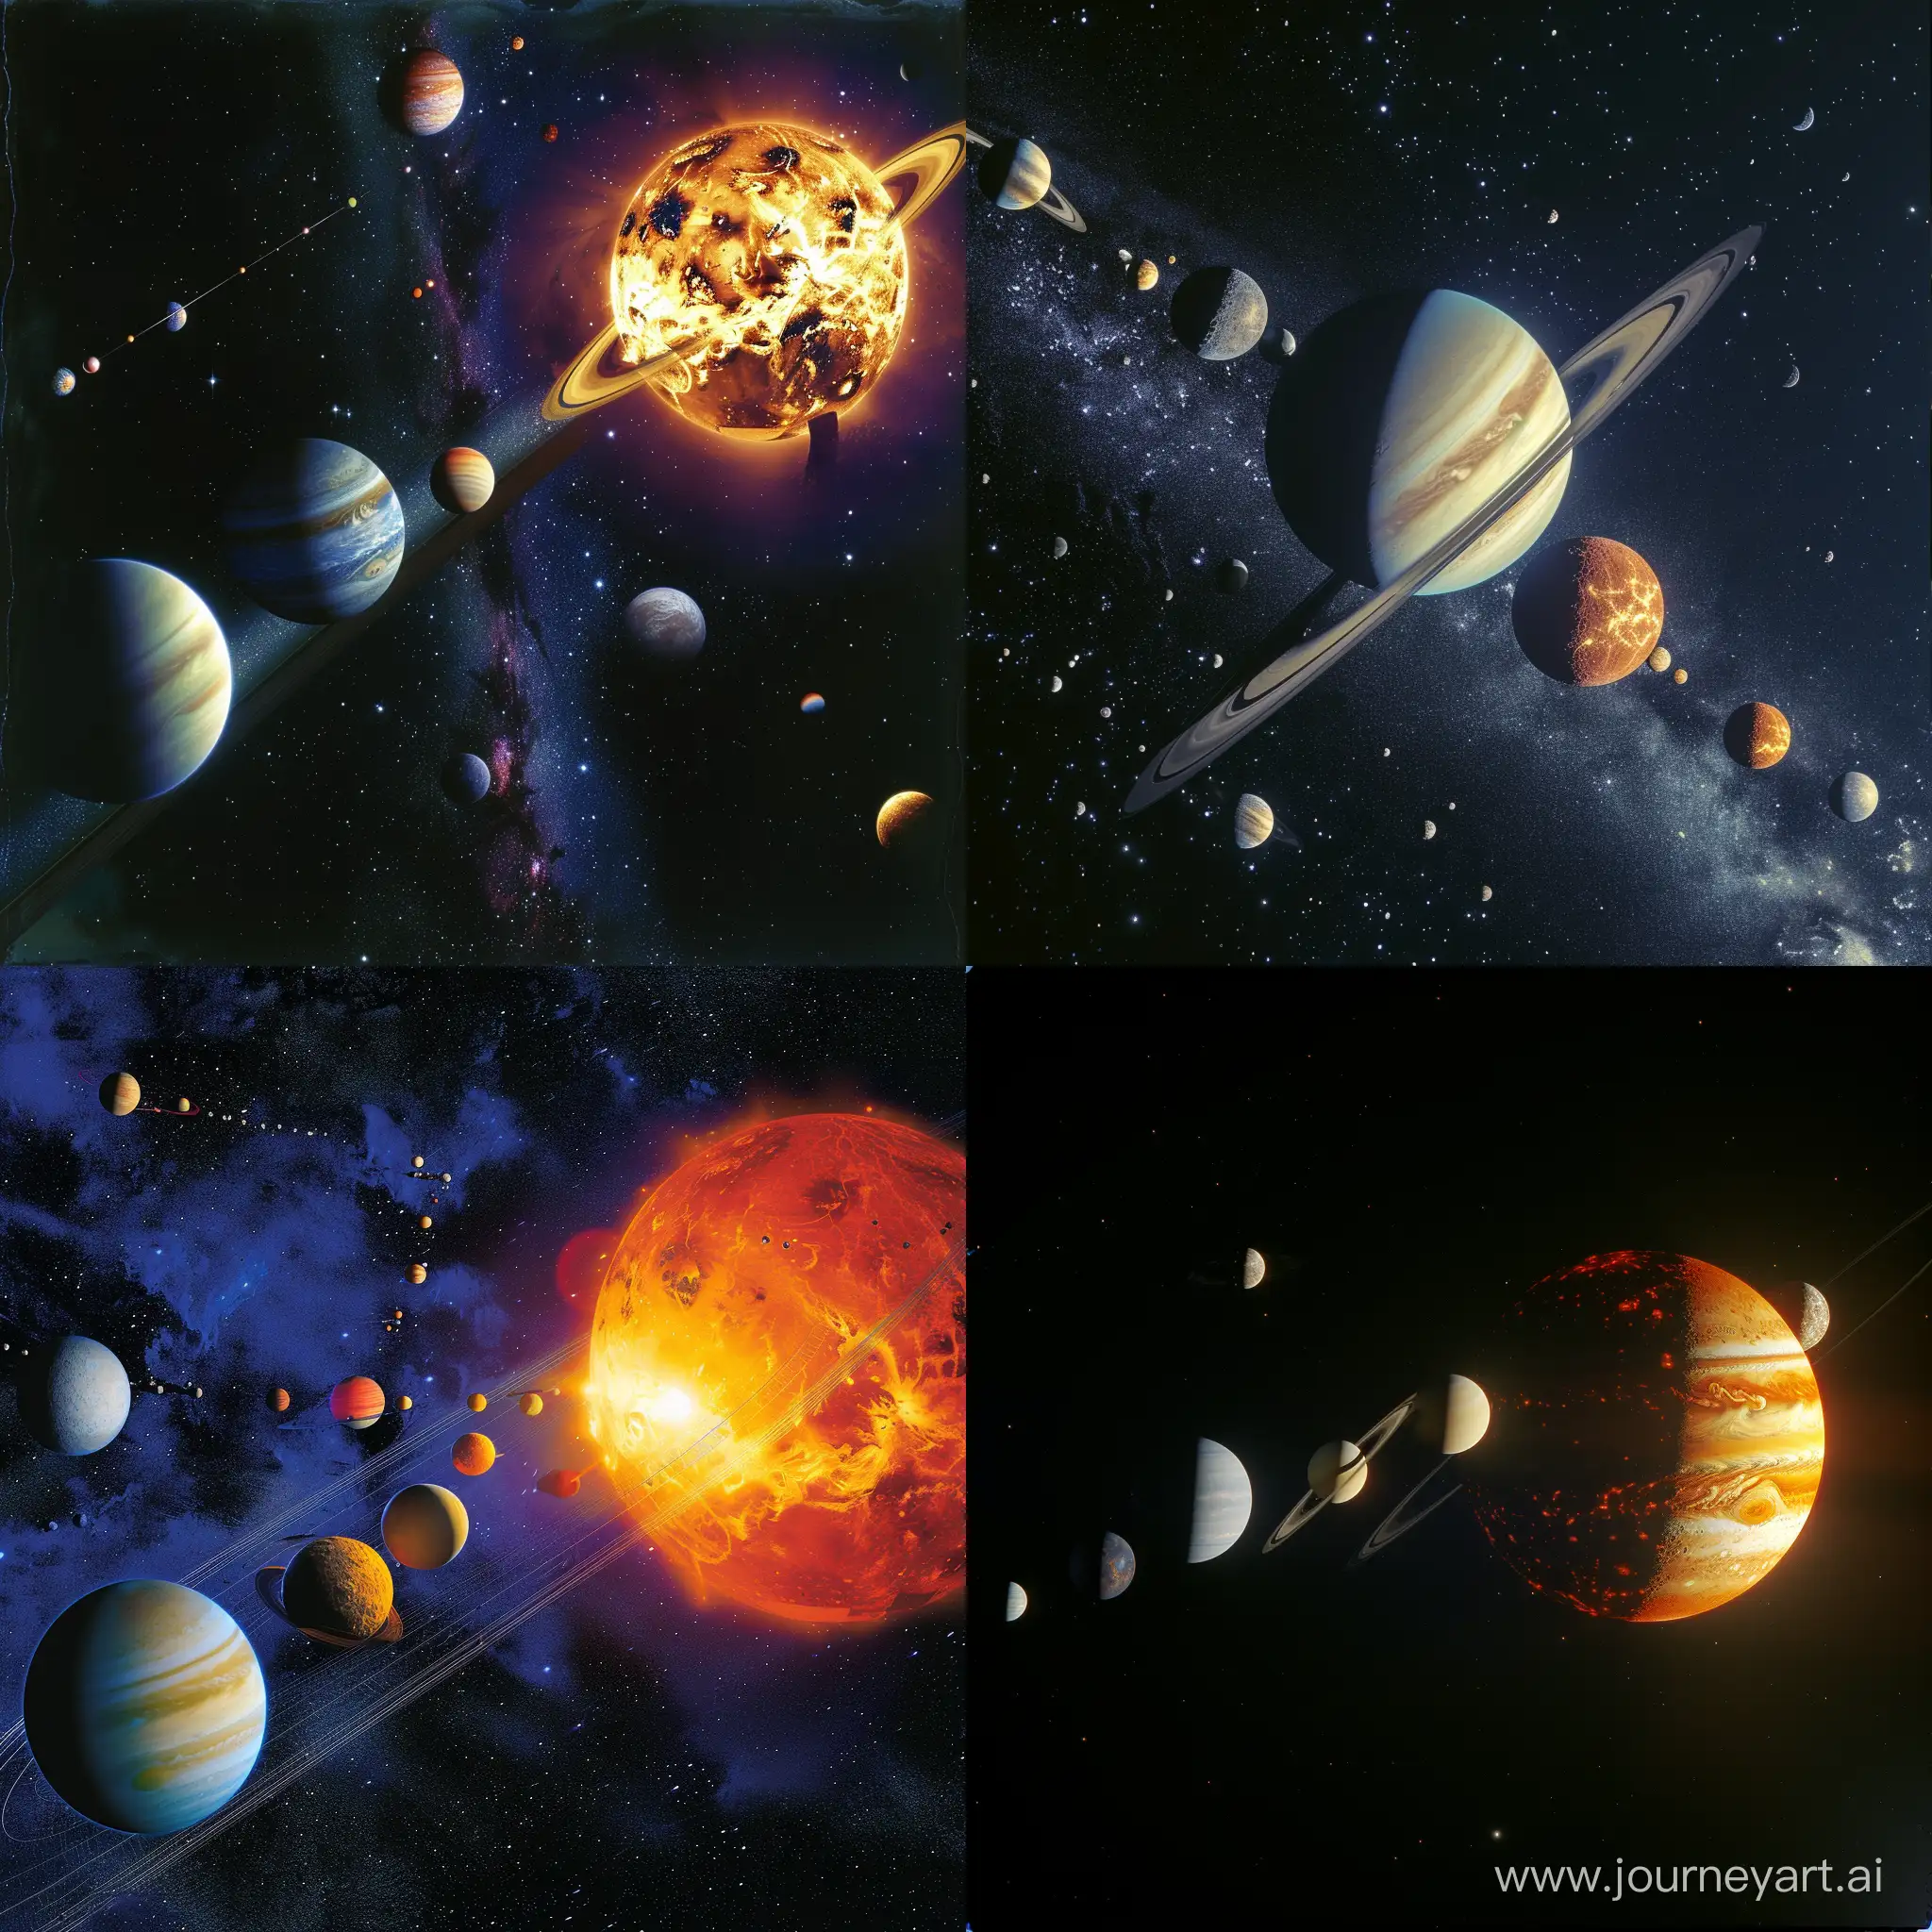 Vibrant-Solar-System-Art-with-6-Planets-in-a-11-Aspect-Ratio